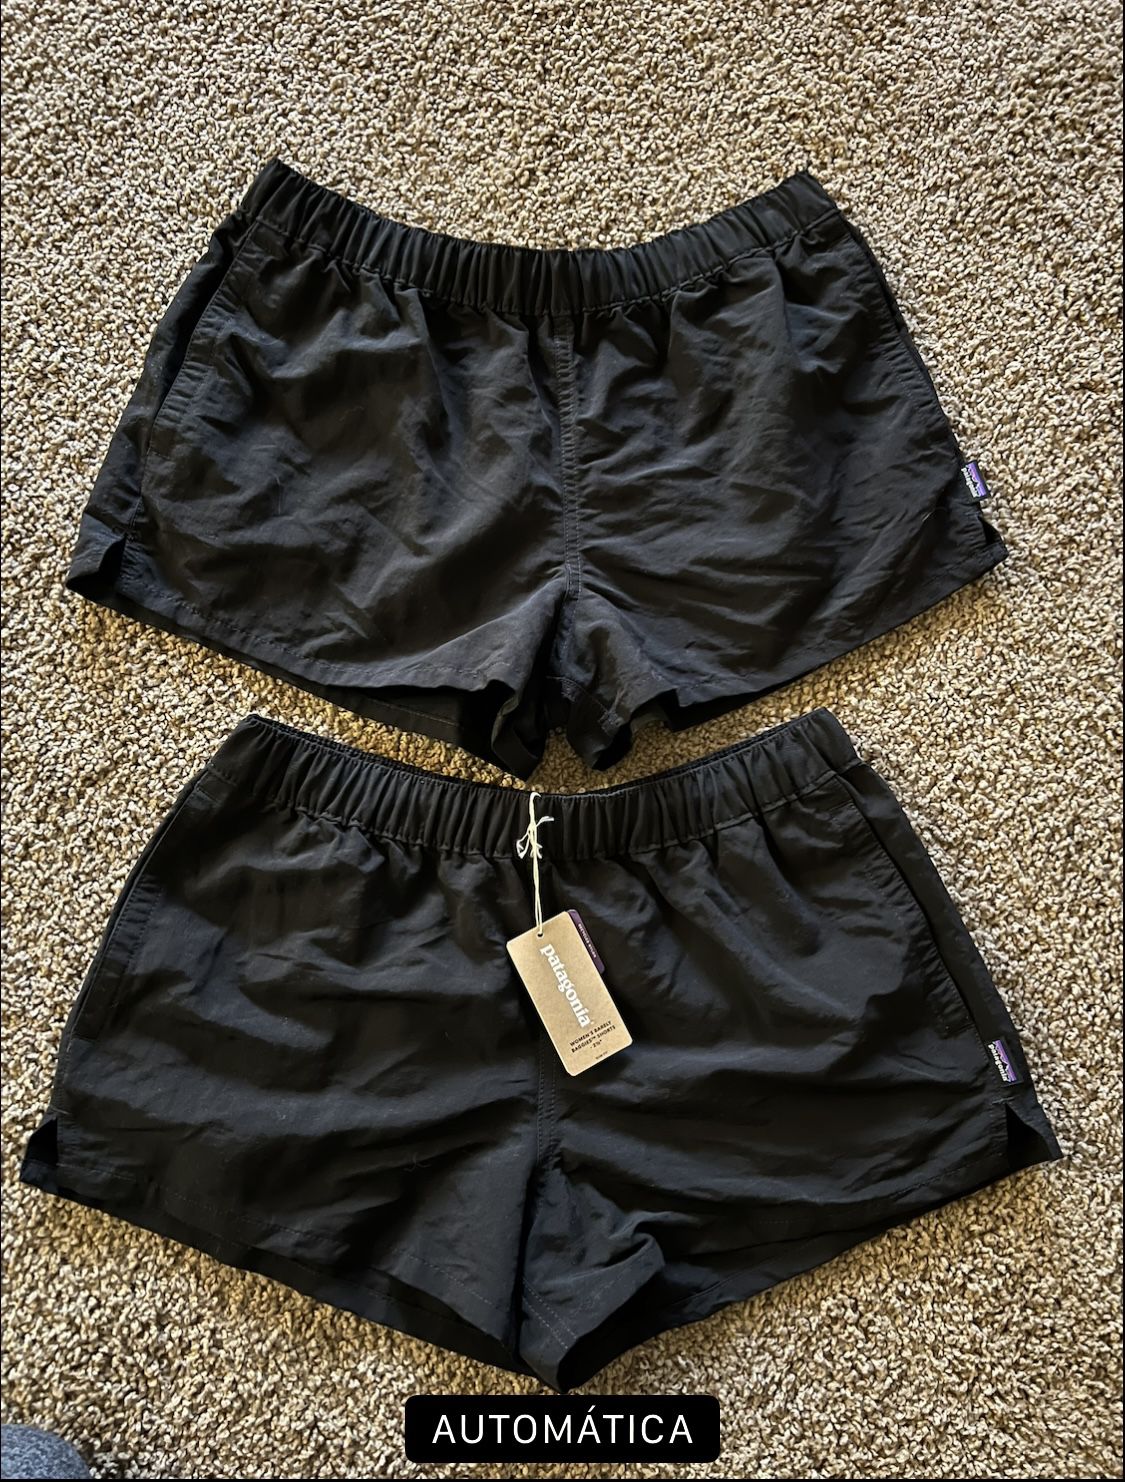 Patagonia shorts for women, new, one has a label, the other does not, but both are new, payments by zelle or paypal